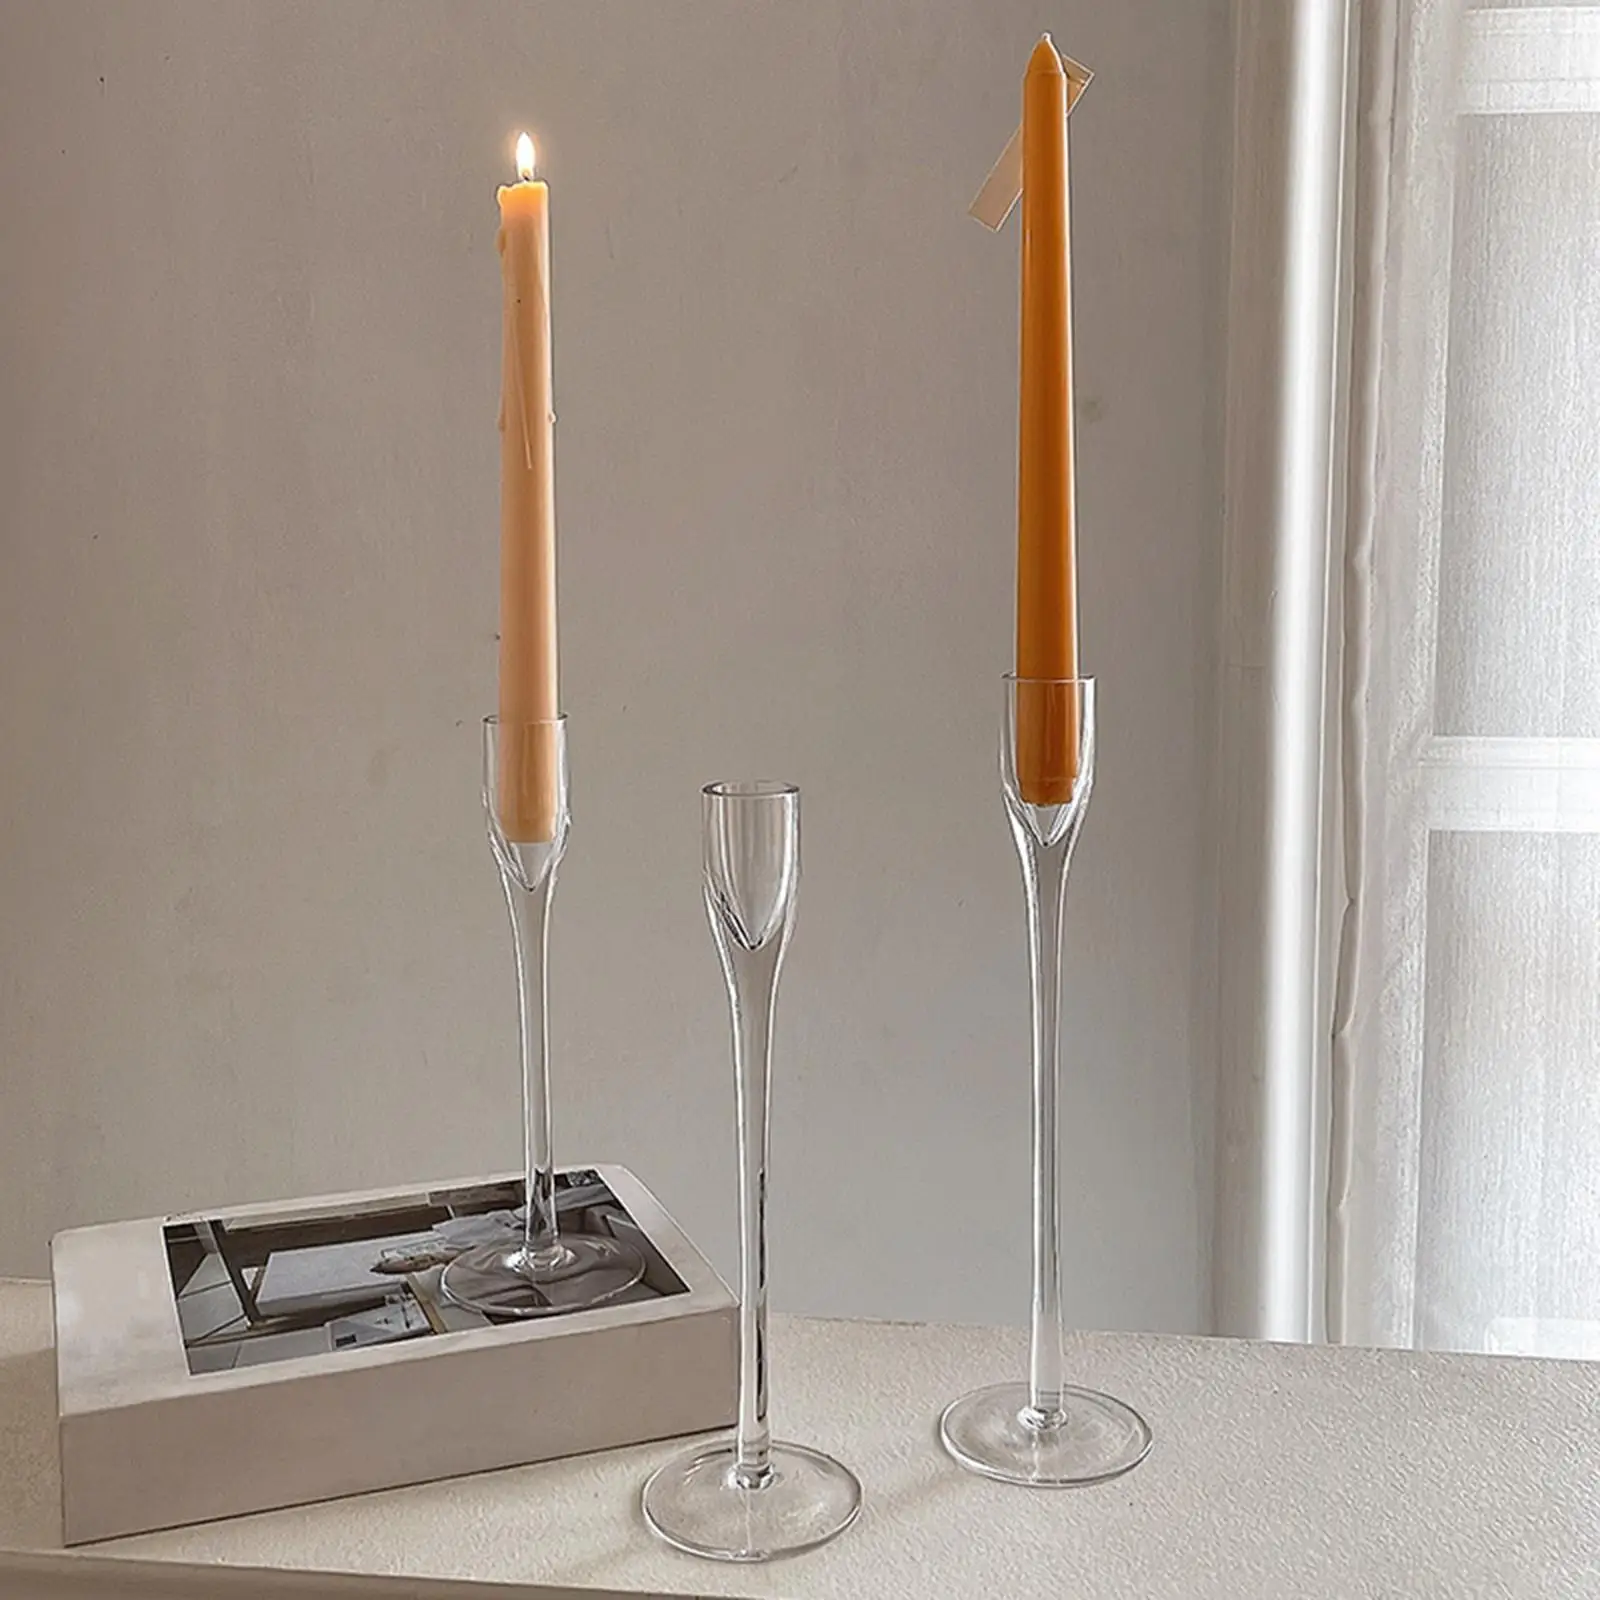 3x Glass Candlestick Home Decor Taper Candle Holders Candleholder for Spring Festival Hotel Fireplace Housewarming Party